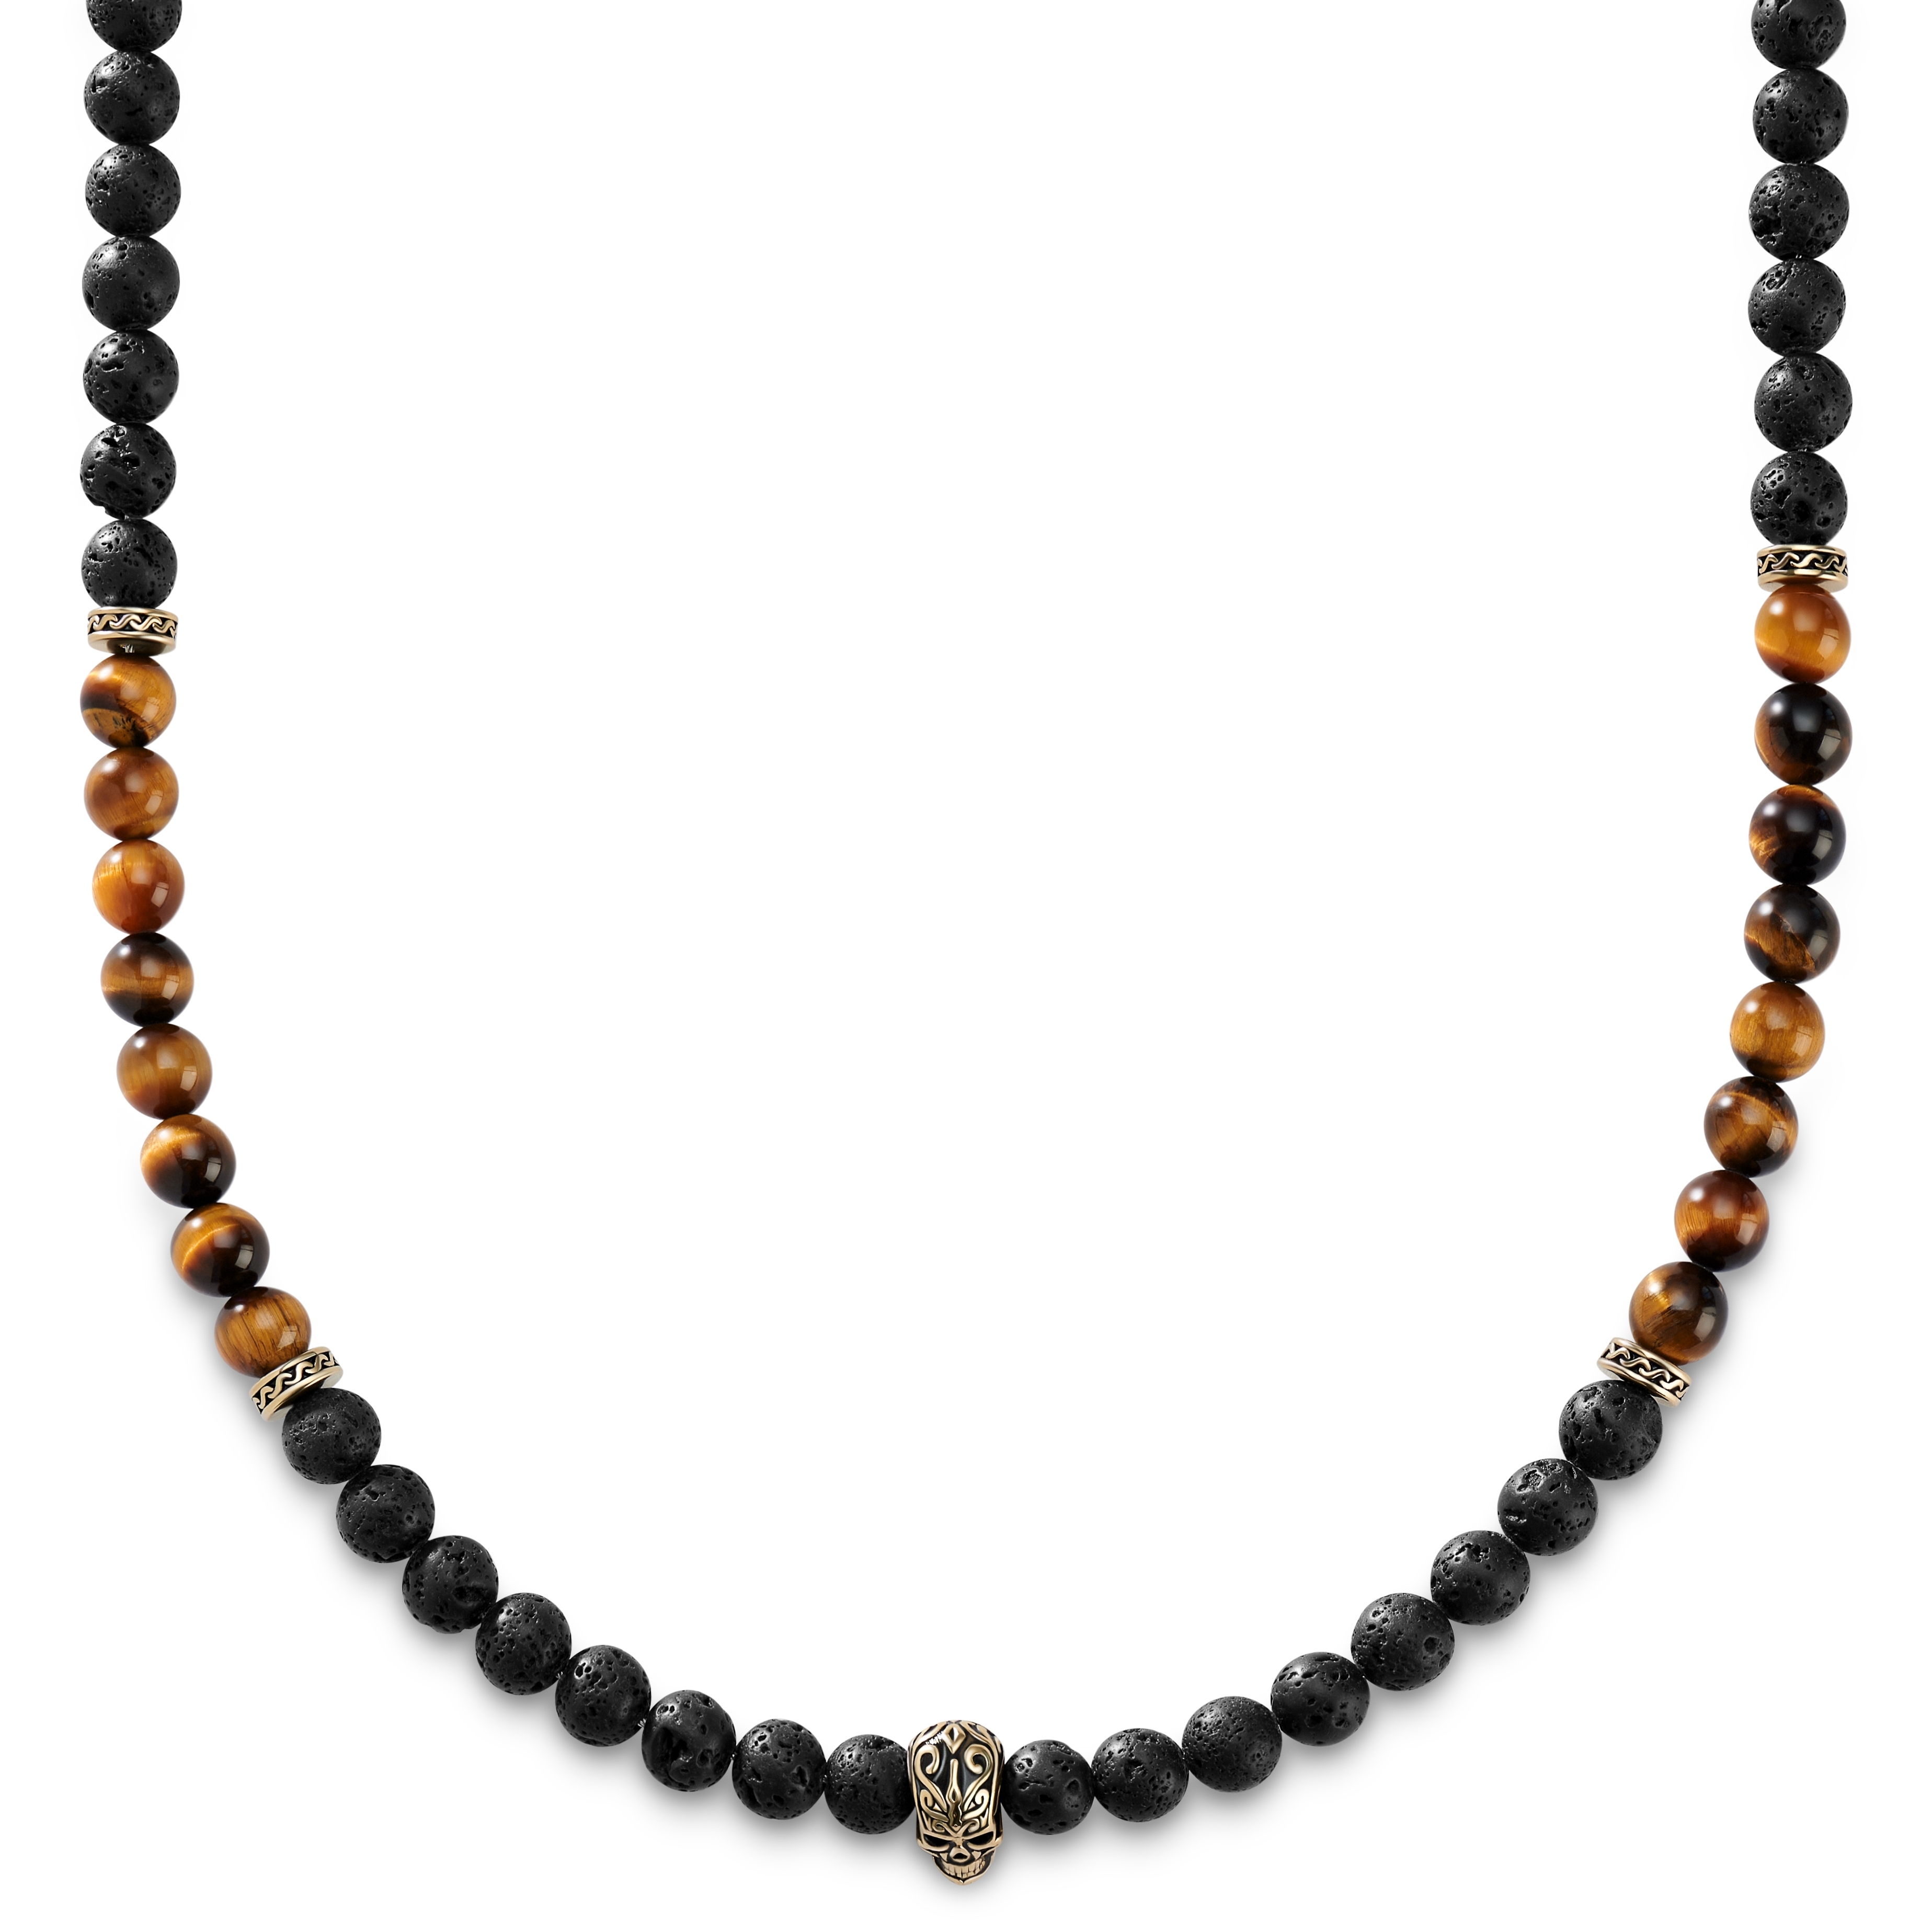 Mens Beaded Necklace With Triangle Pendant | Classy Men Collection